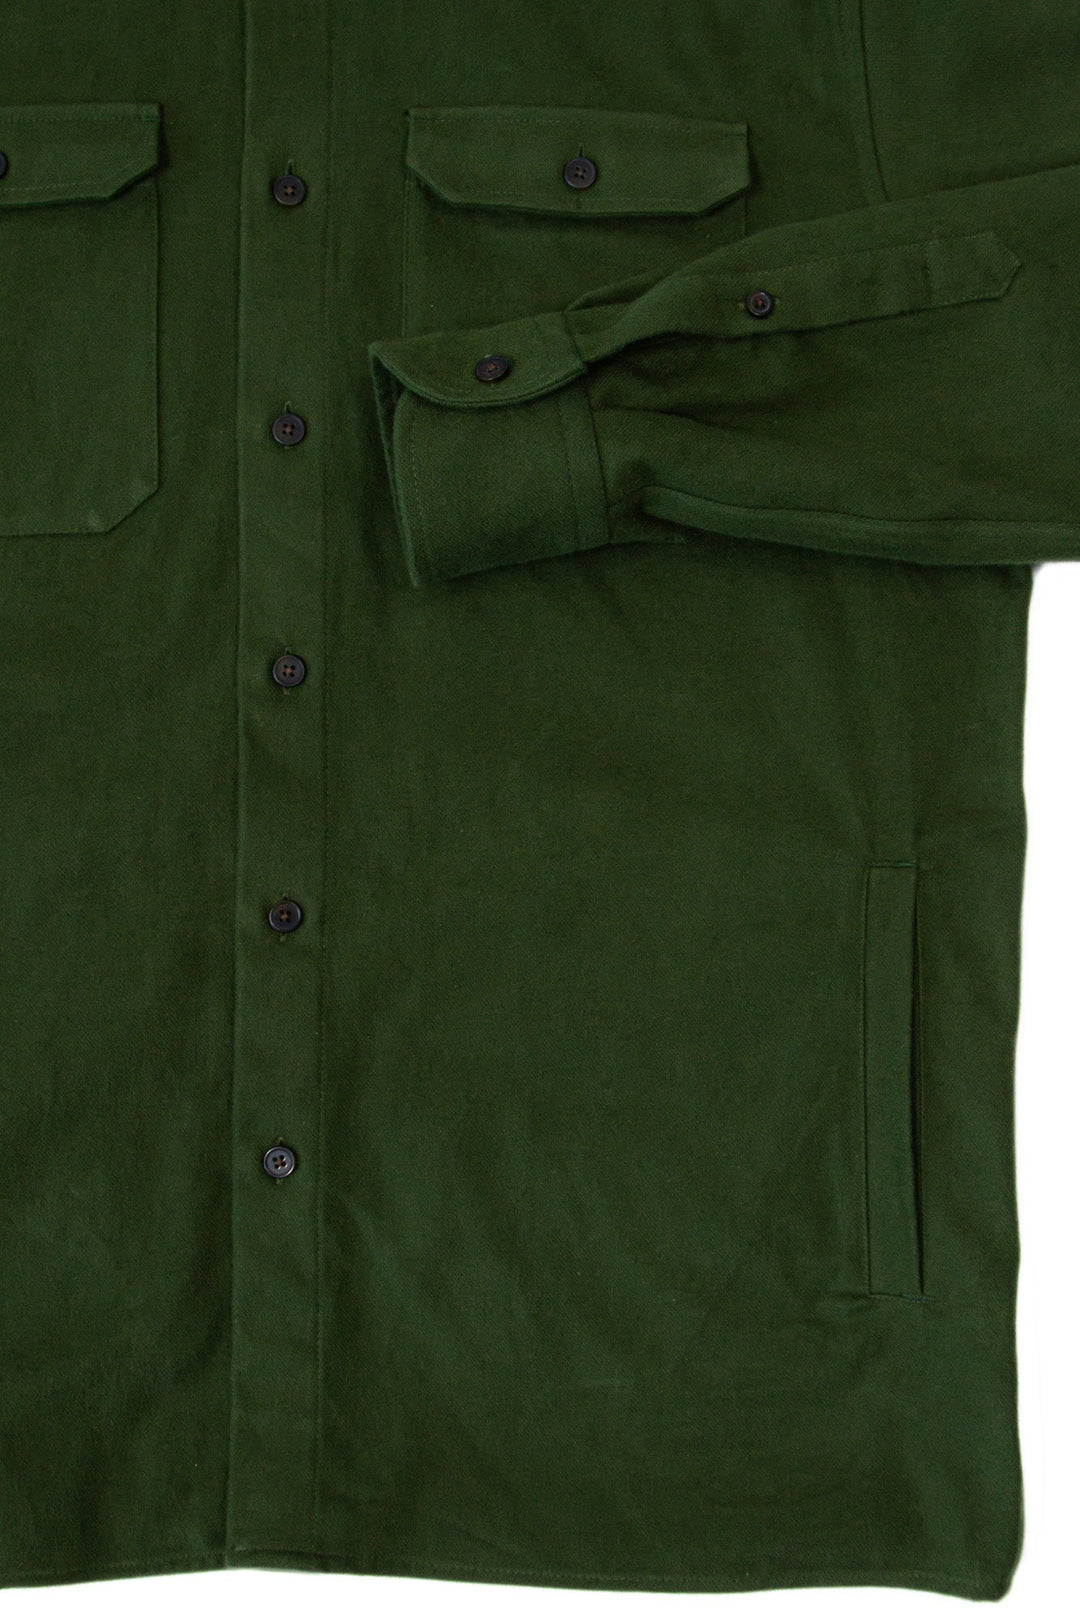 MuskOx Clothing The Yukon Flannel Shirt Jacket, Green. Green Flannel Shirt Jacket. 100% Cotton, Durable Flannel Shirt. Our flannels are made of a heavy duty cotton twill with a soft brushed finish so you can be prepared for any adventure without sacrificing comfort. Since we want you to be built for every occasion, we've included two secure chest pockets and side pockets for you to bring your vitals along.